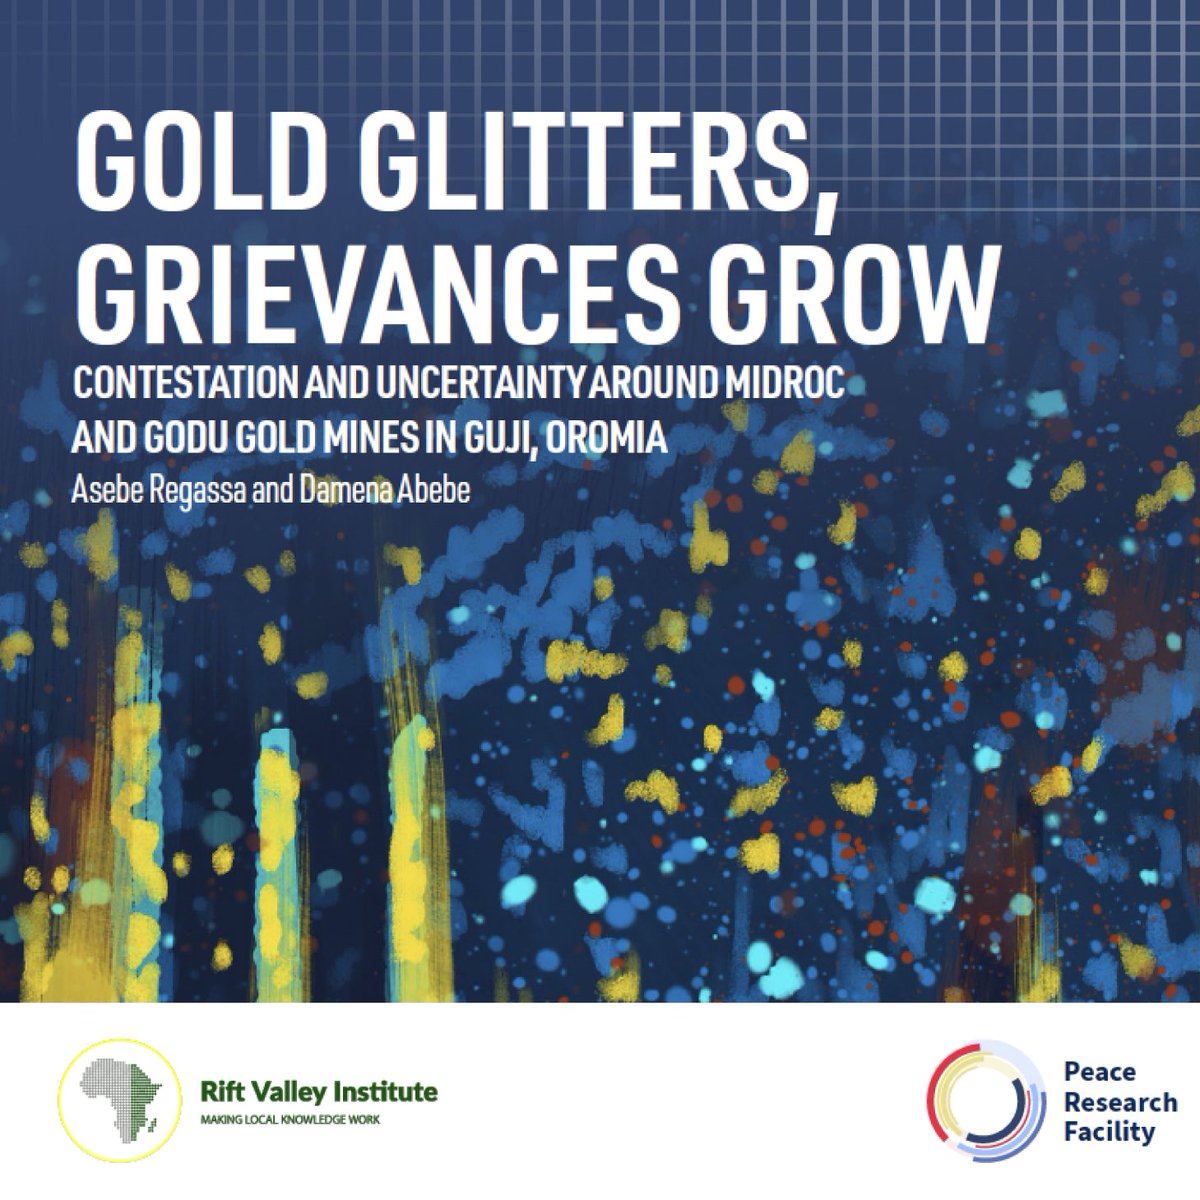 NEW REPORT | Gold Glitters, Grievances Grow This report by @AsebeRegassa & @DamenaAbebe1 looks at #Ethiopia's gold rush in the Guji zones, exploring how political dynamics shape resource extraction & government responses to local grievances. Read here: rb.gy/9sv8c